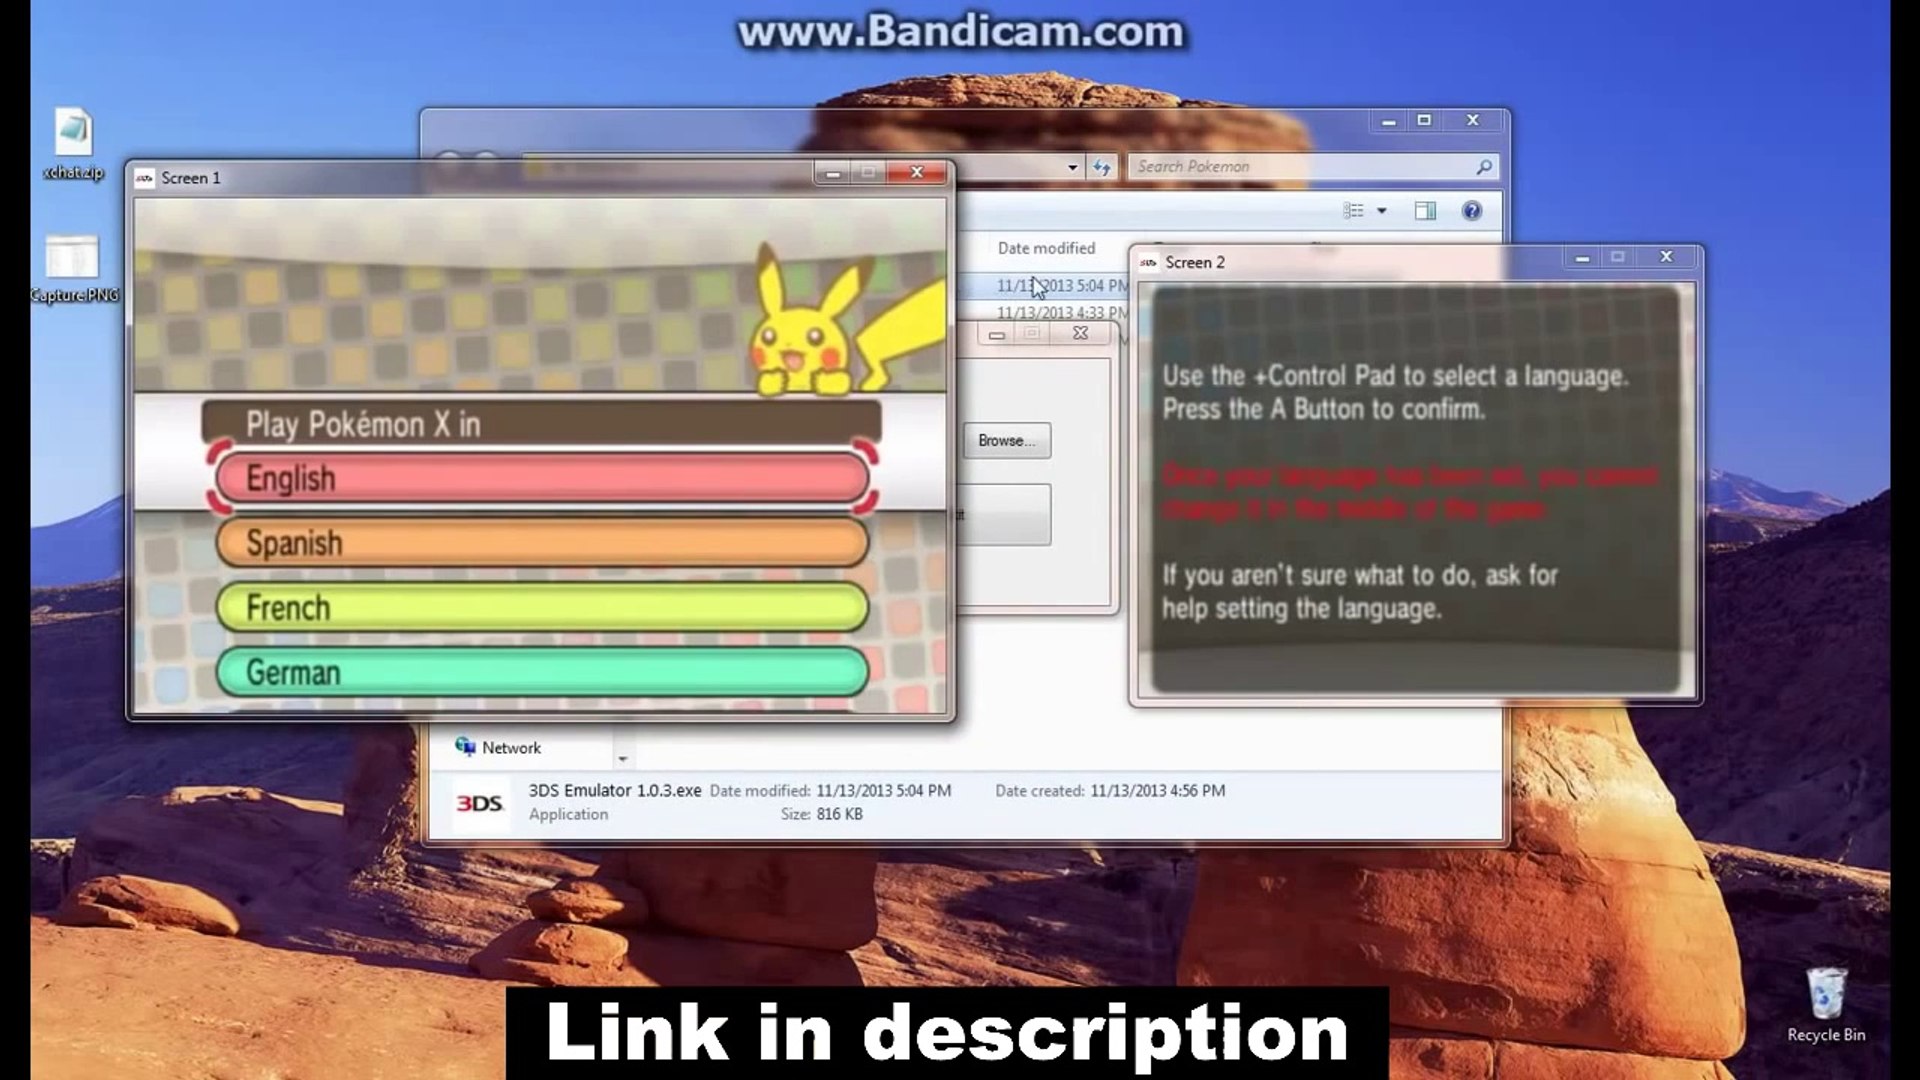 Best Nintendo 3DS Emulator Released - Free Download 2014 - video Dailymotion